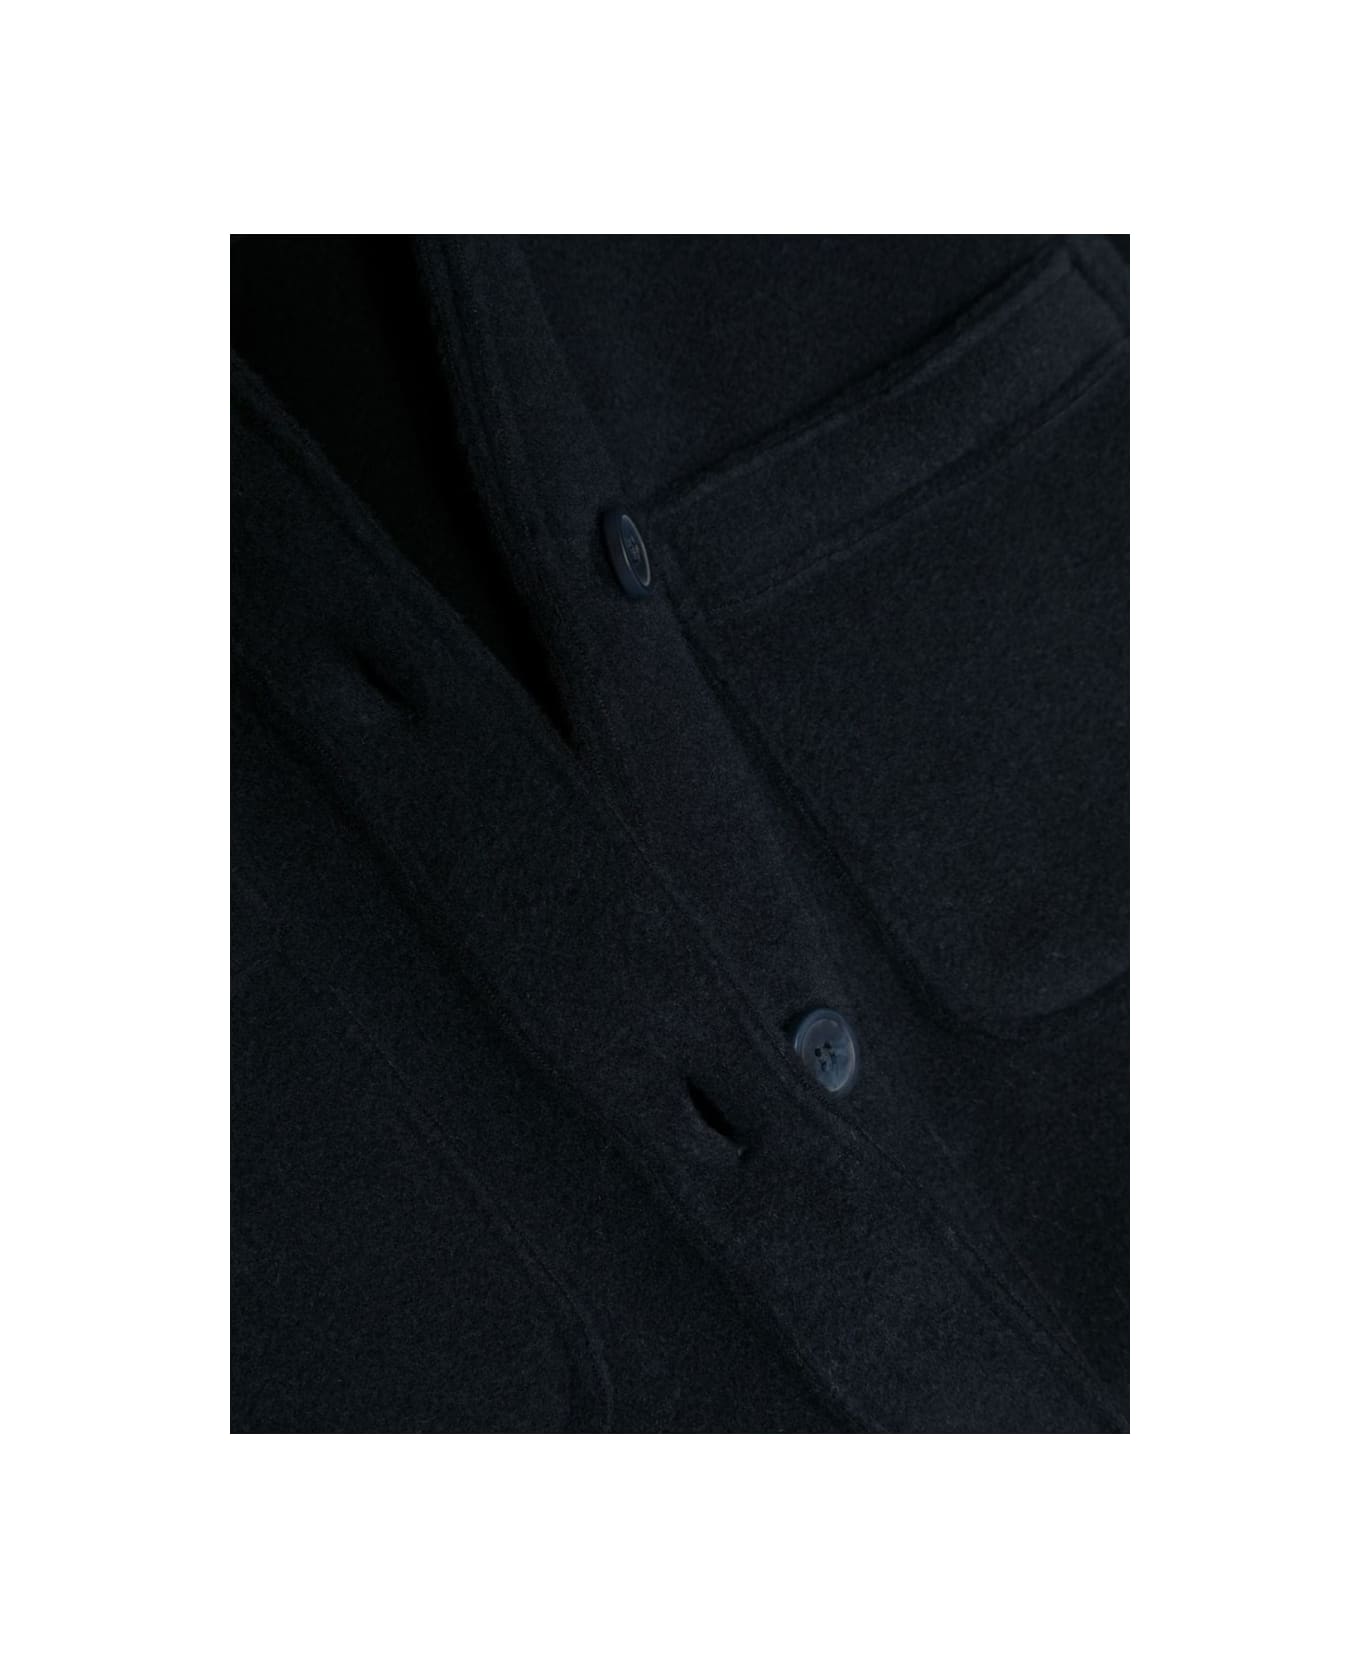 Il Gufo Jacket With Buttons And Collar - BLUE コート＆ジャケット